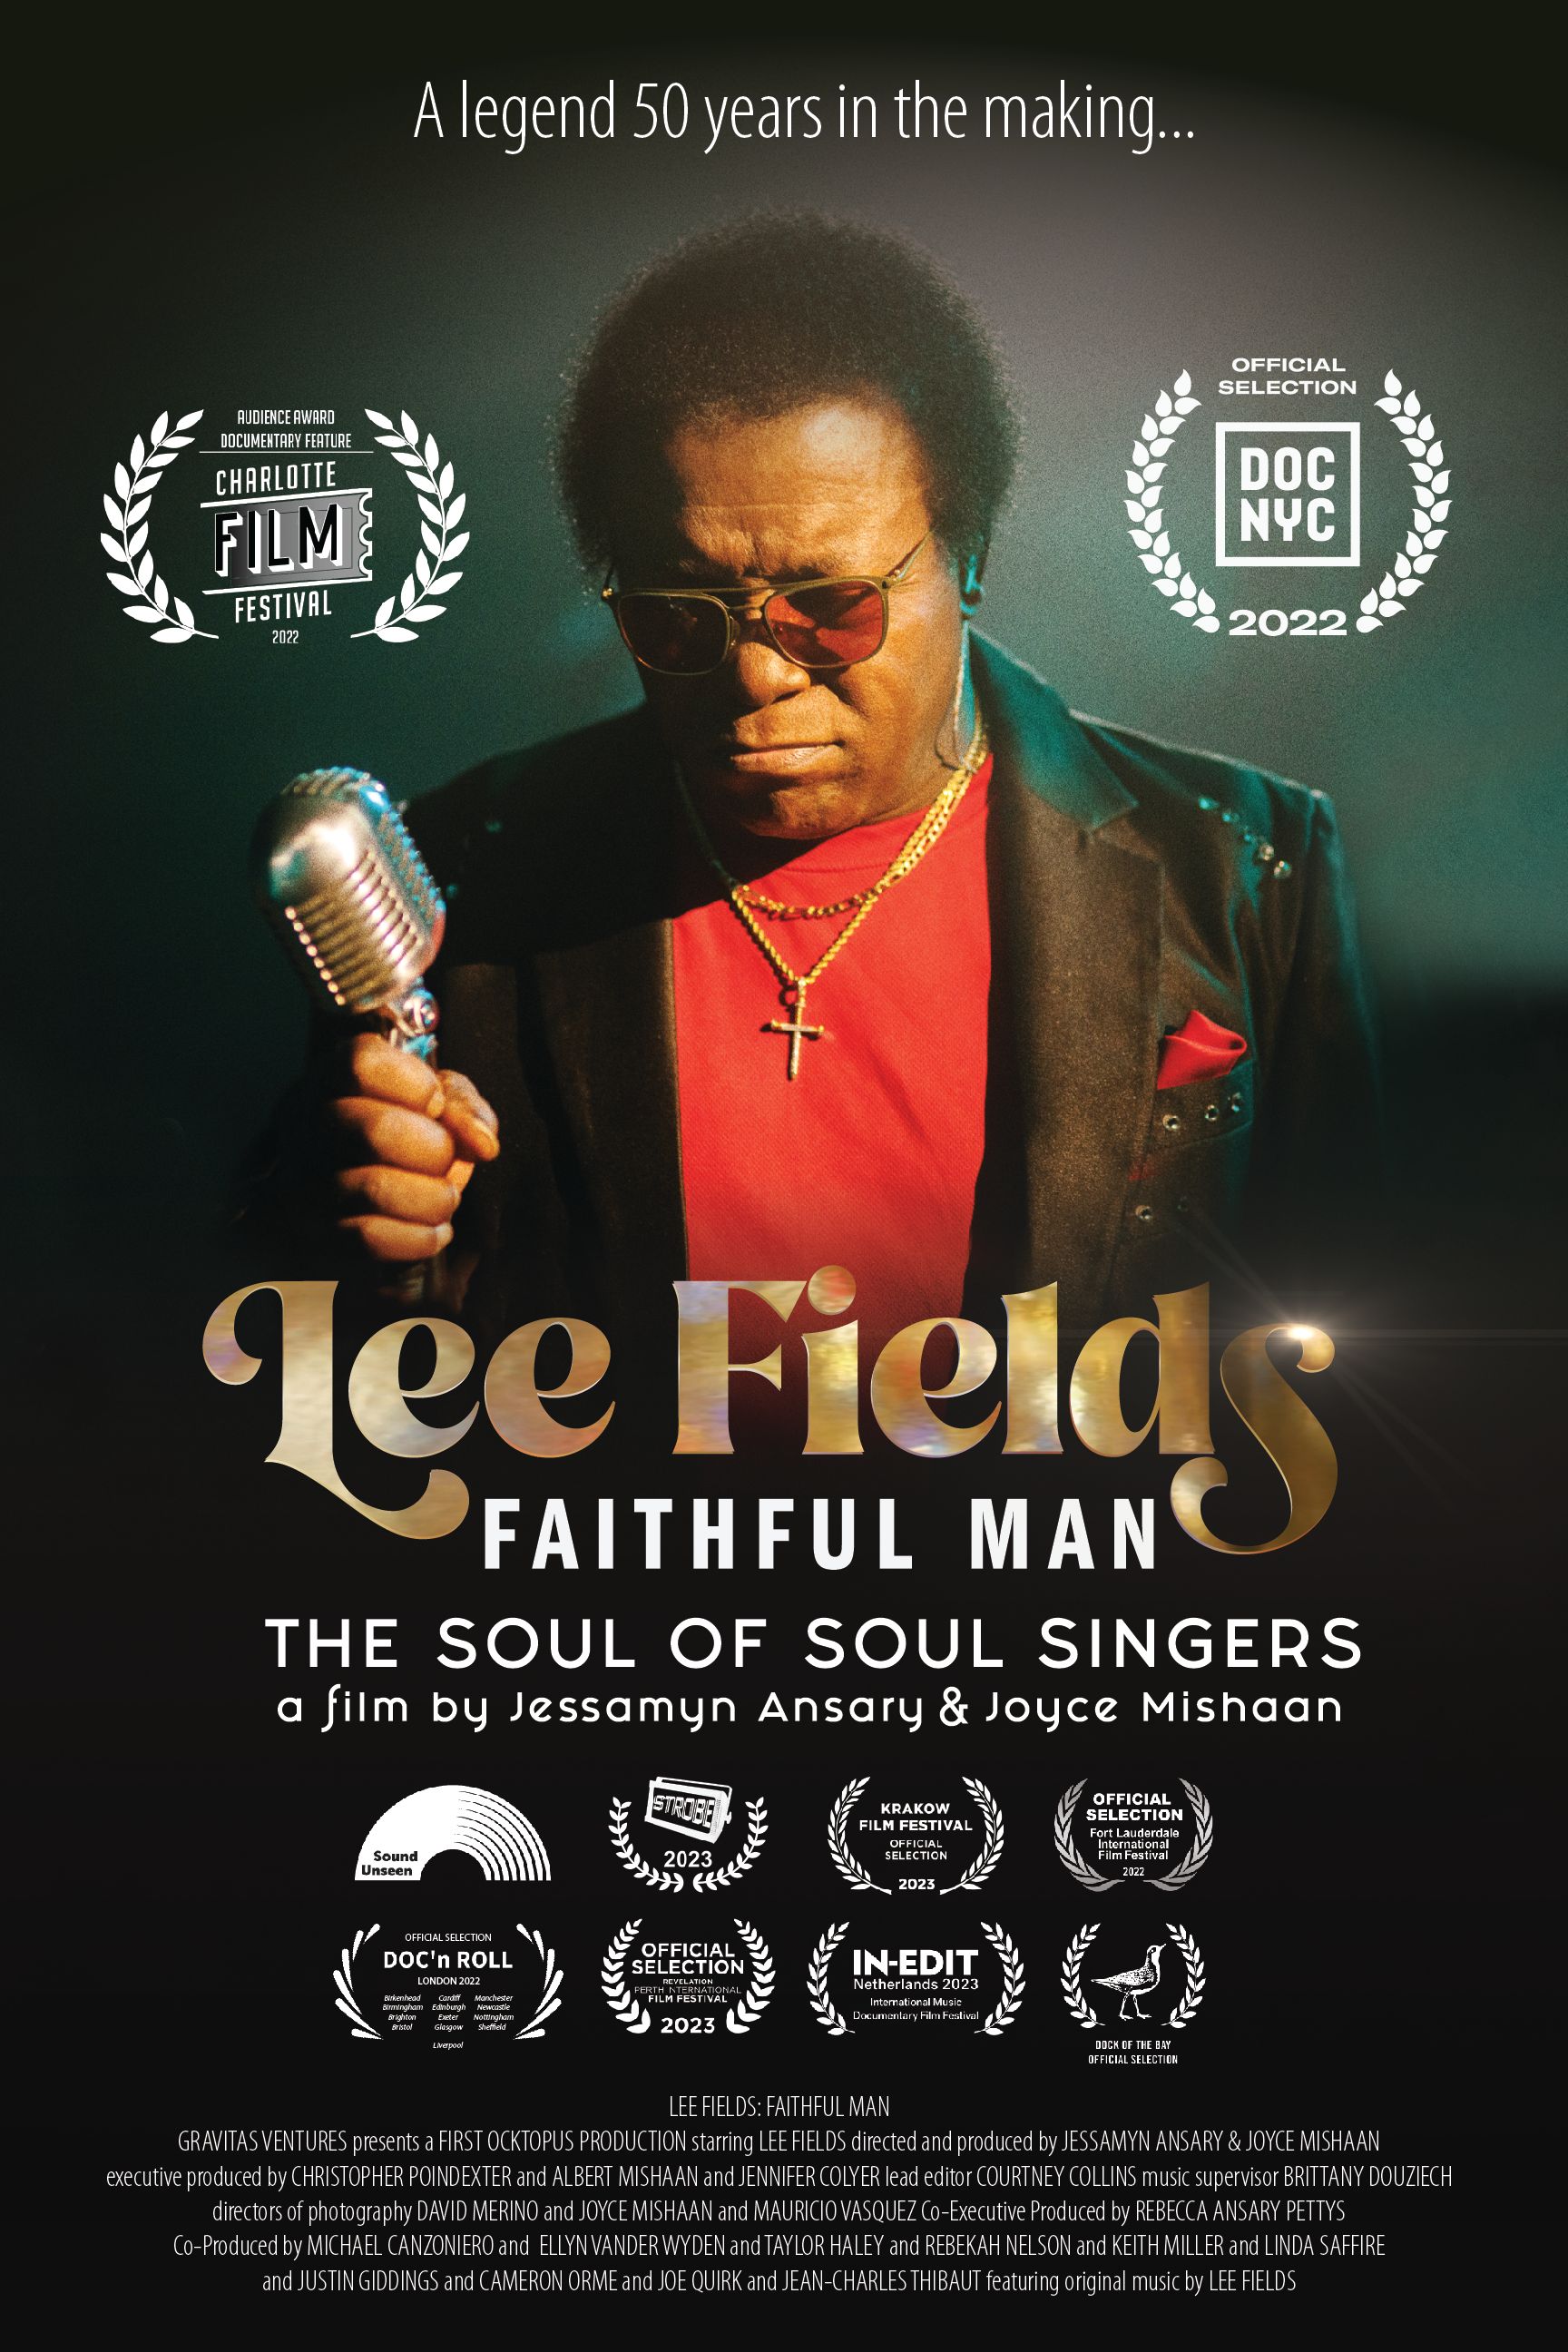 From His Rise and Fall in the 1970s to His Comeback in the 21st Century with a New Generation of Fans, Soul/Funk Legend Lee Fields is Chronicled in the Award-Winning Documentary, Lee Fields: Faithful Man